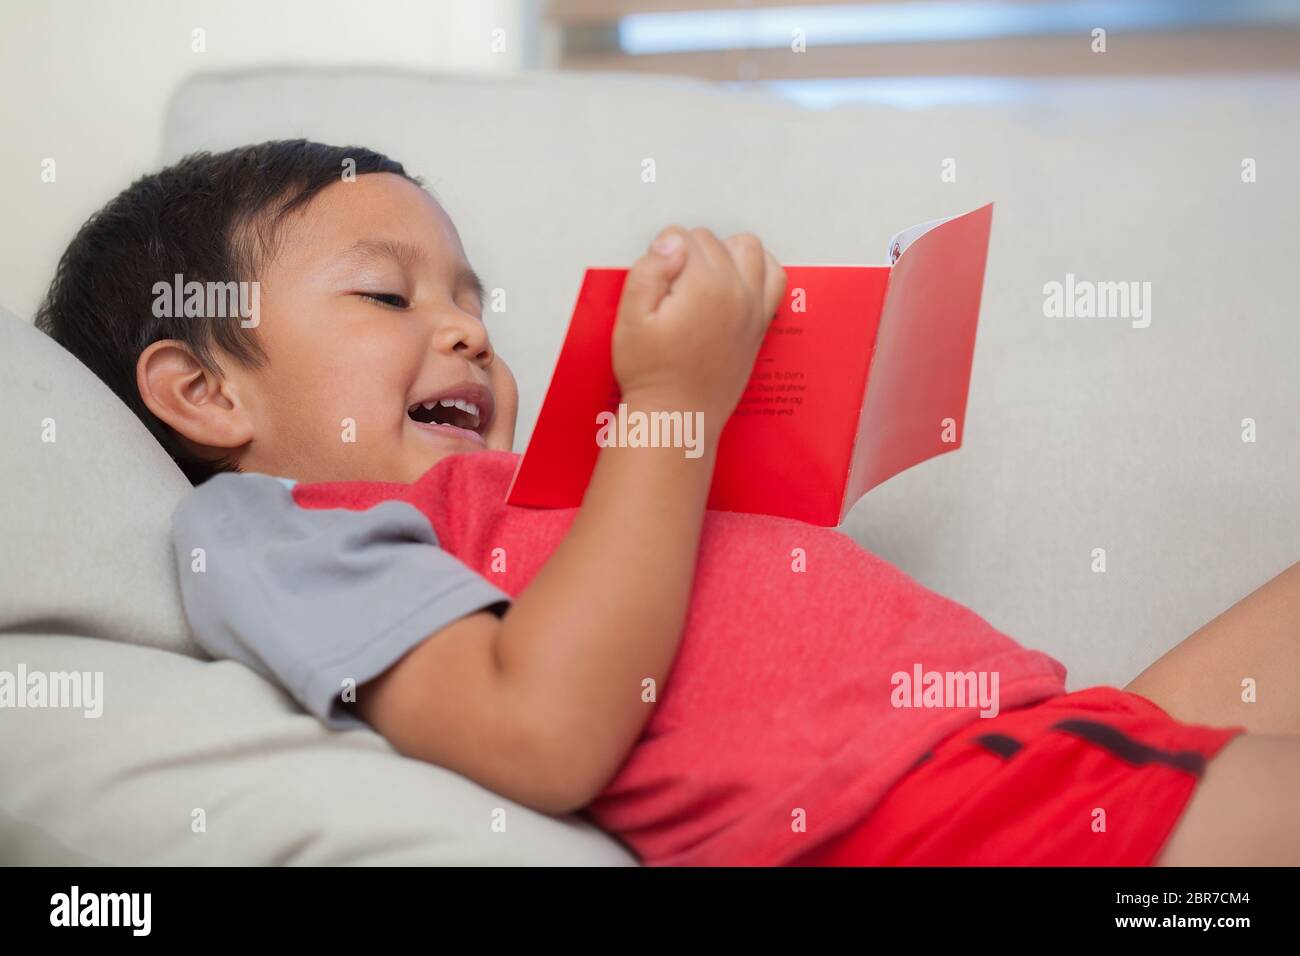 A young reader holding a simple book in his hand and reading out loud while relaxed on a couch. Stock Photo